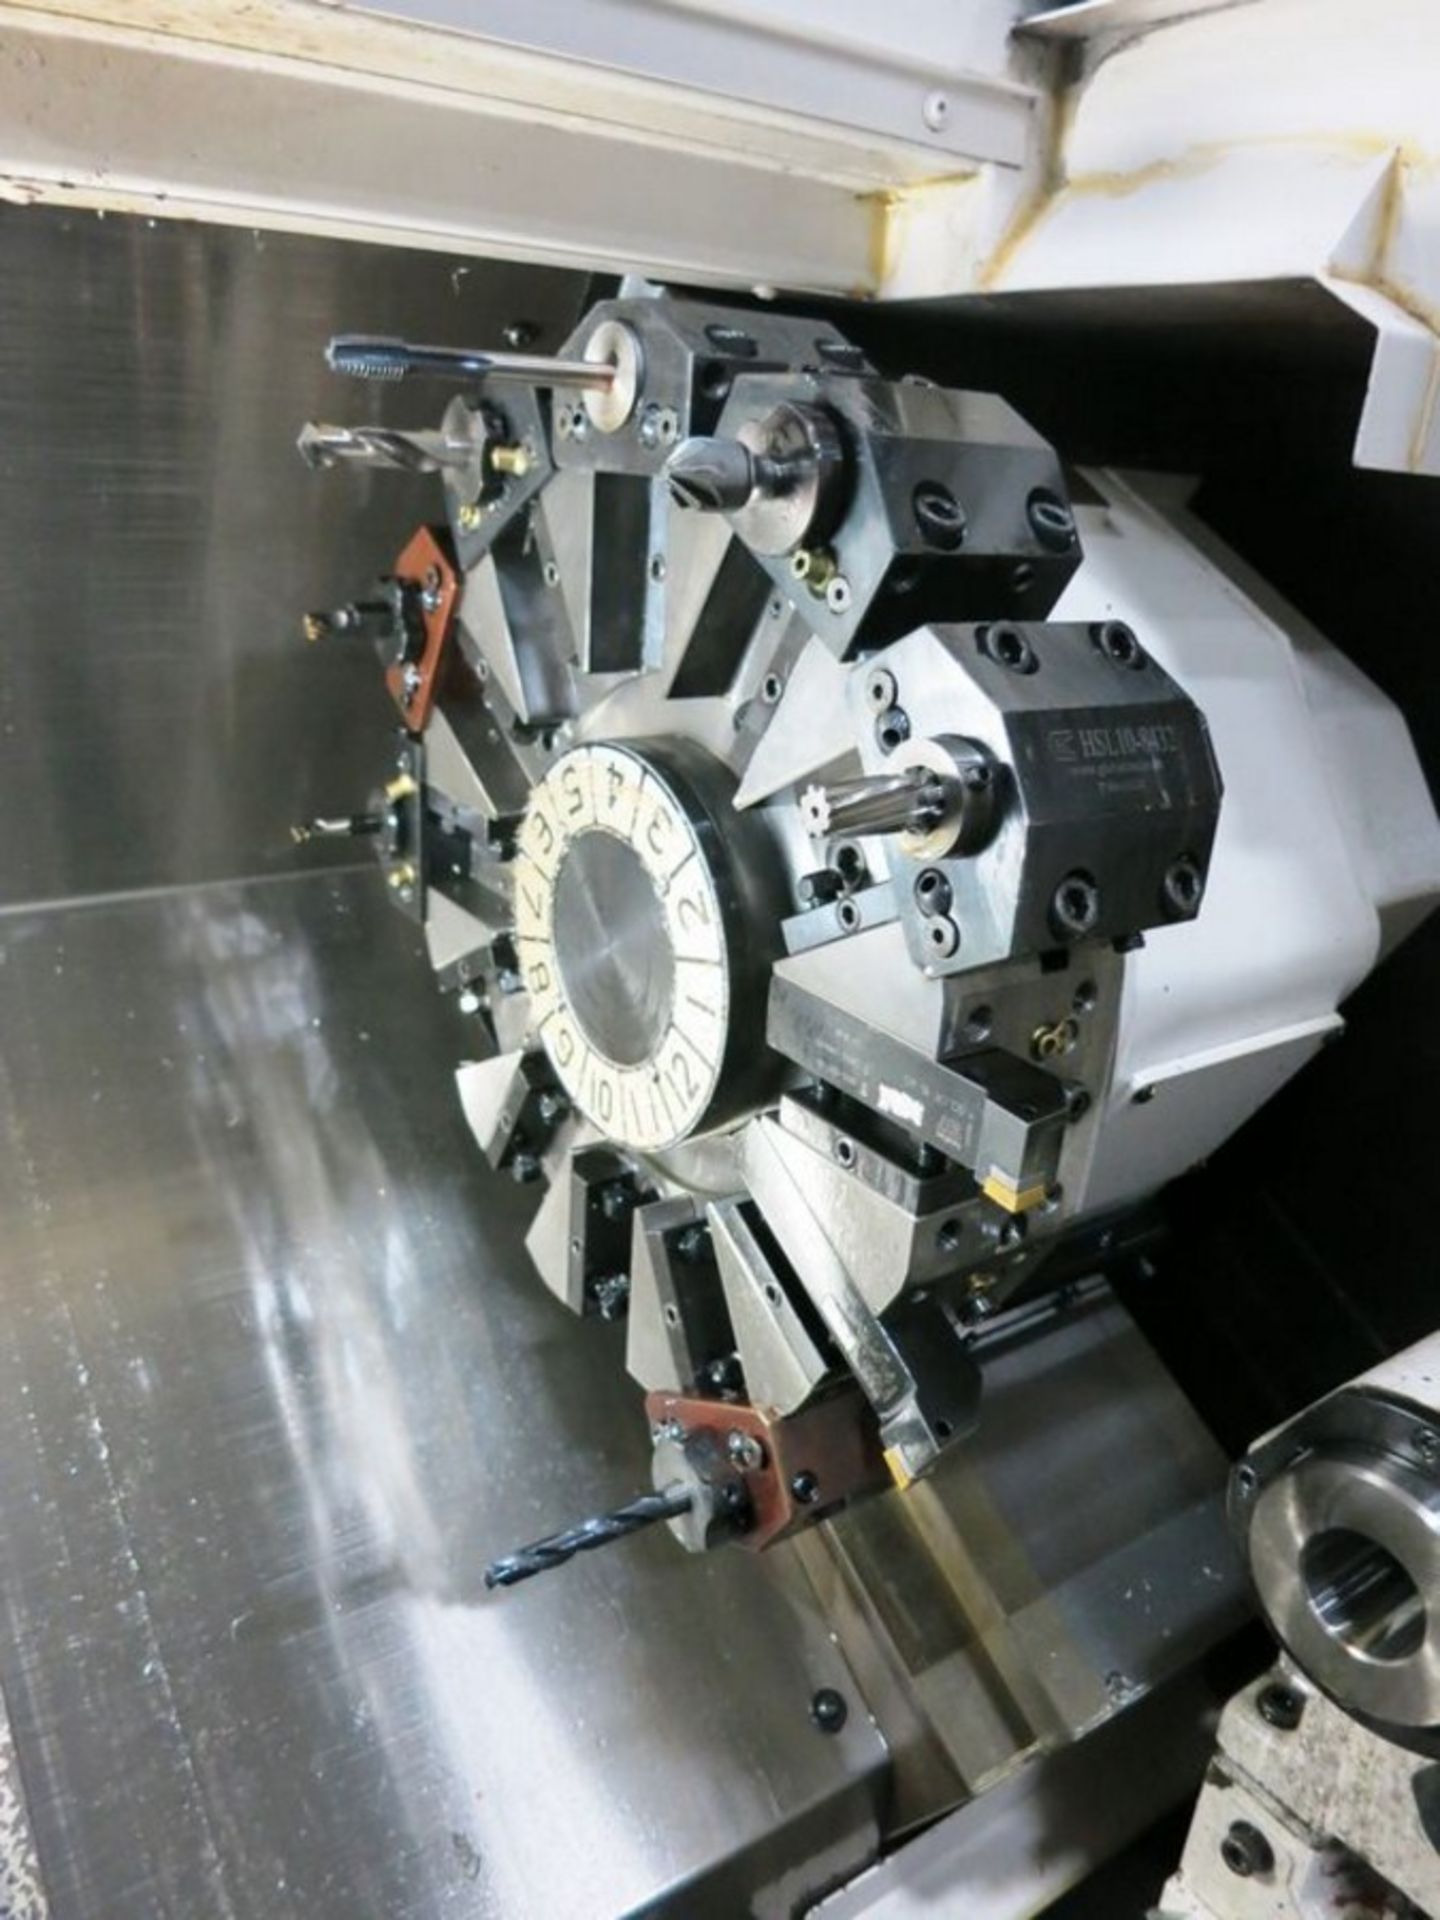 Okuma Genos L250E 2-Axis CNC Turning Center Lathe, S/N C3115, New 2011 General Specifications, Swing - Image 5 of 9